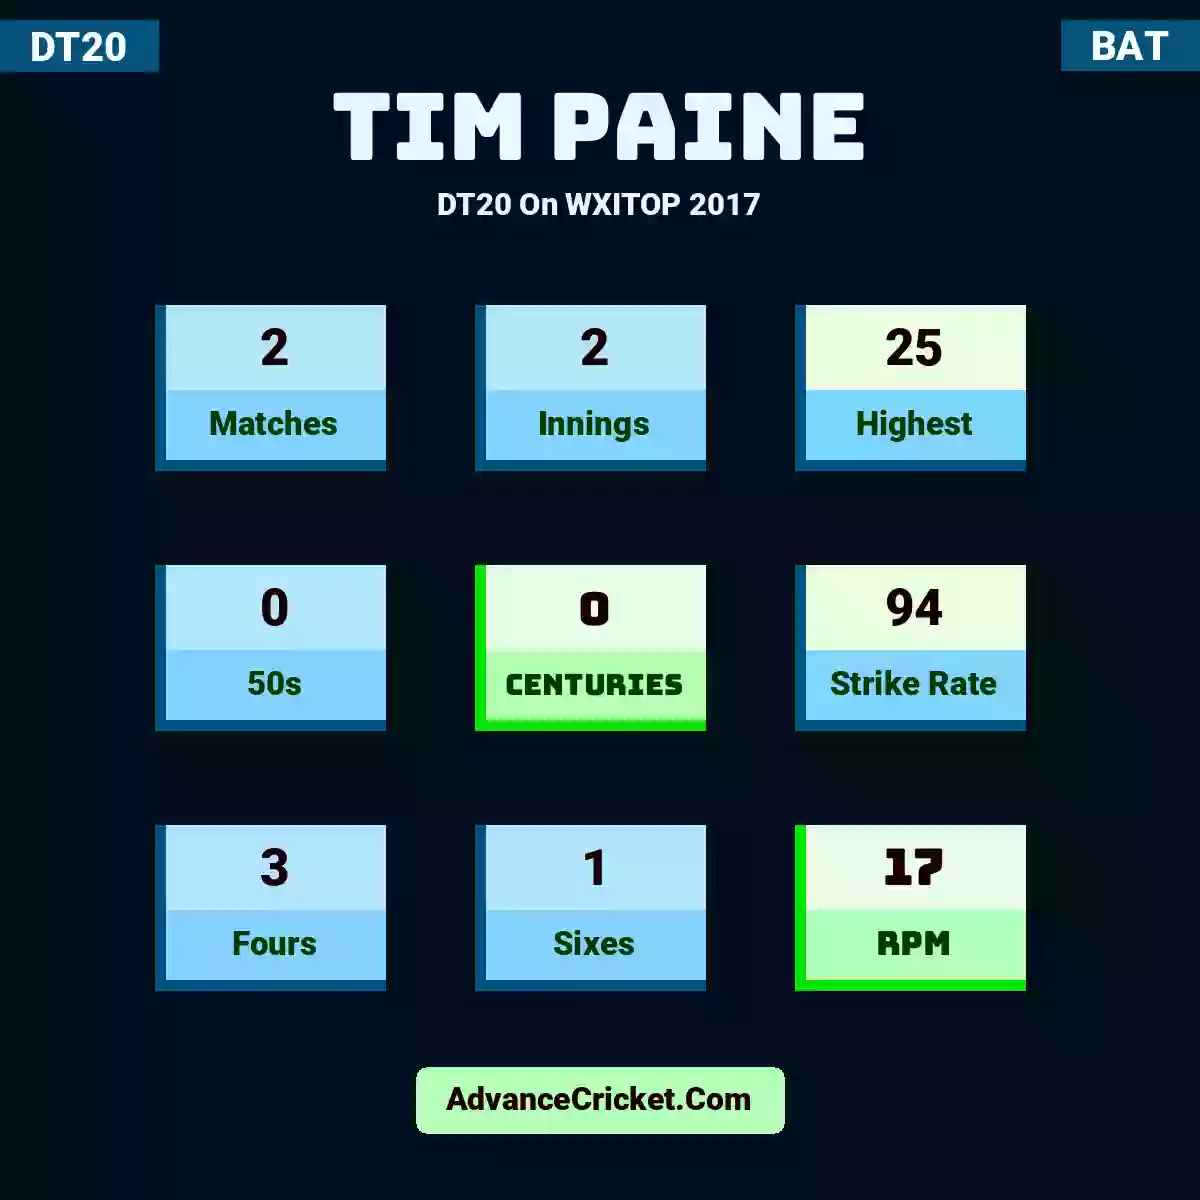 Tim Paine DT20  On WXITOP 2017, Tim Paine played 2 matches, scored 25 runs as highest, 0 half-centuries, and 0 centuries, with a strike rate of 94. T.Paine hit 3 fours and 1 sixes, with an RPM of 17.